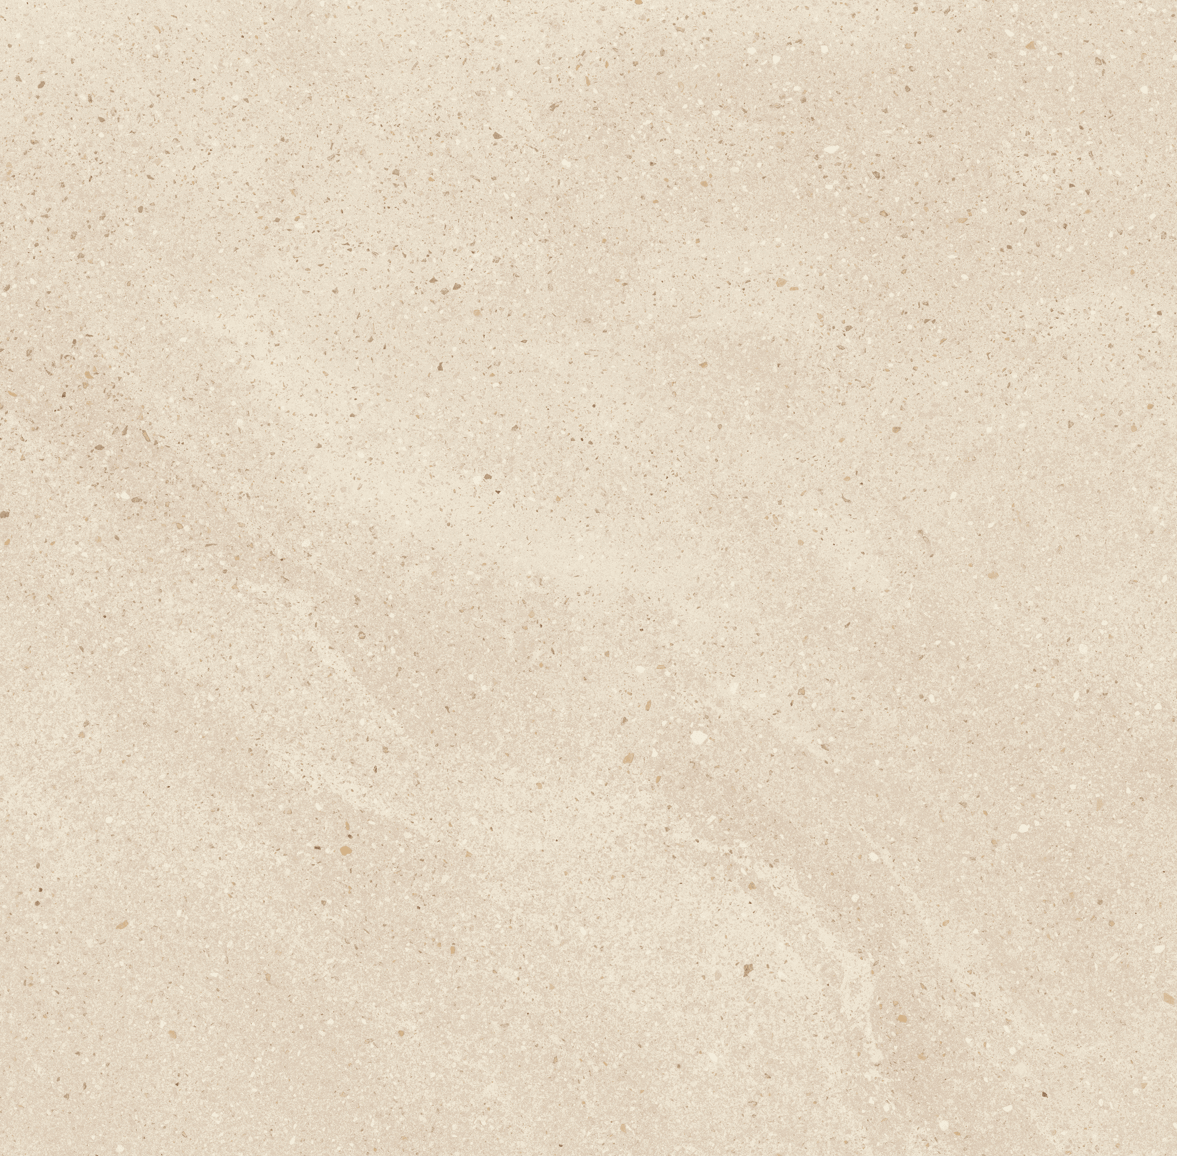 600x600mm Valencia Greige In/Out Non-Rectified Porcelain Tile 4984